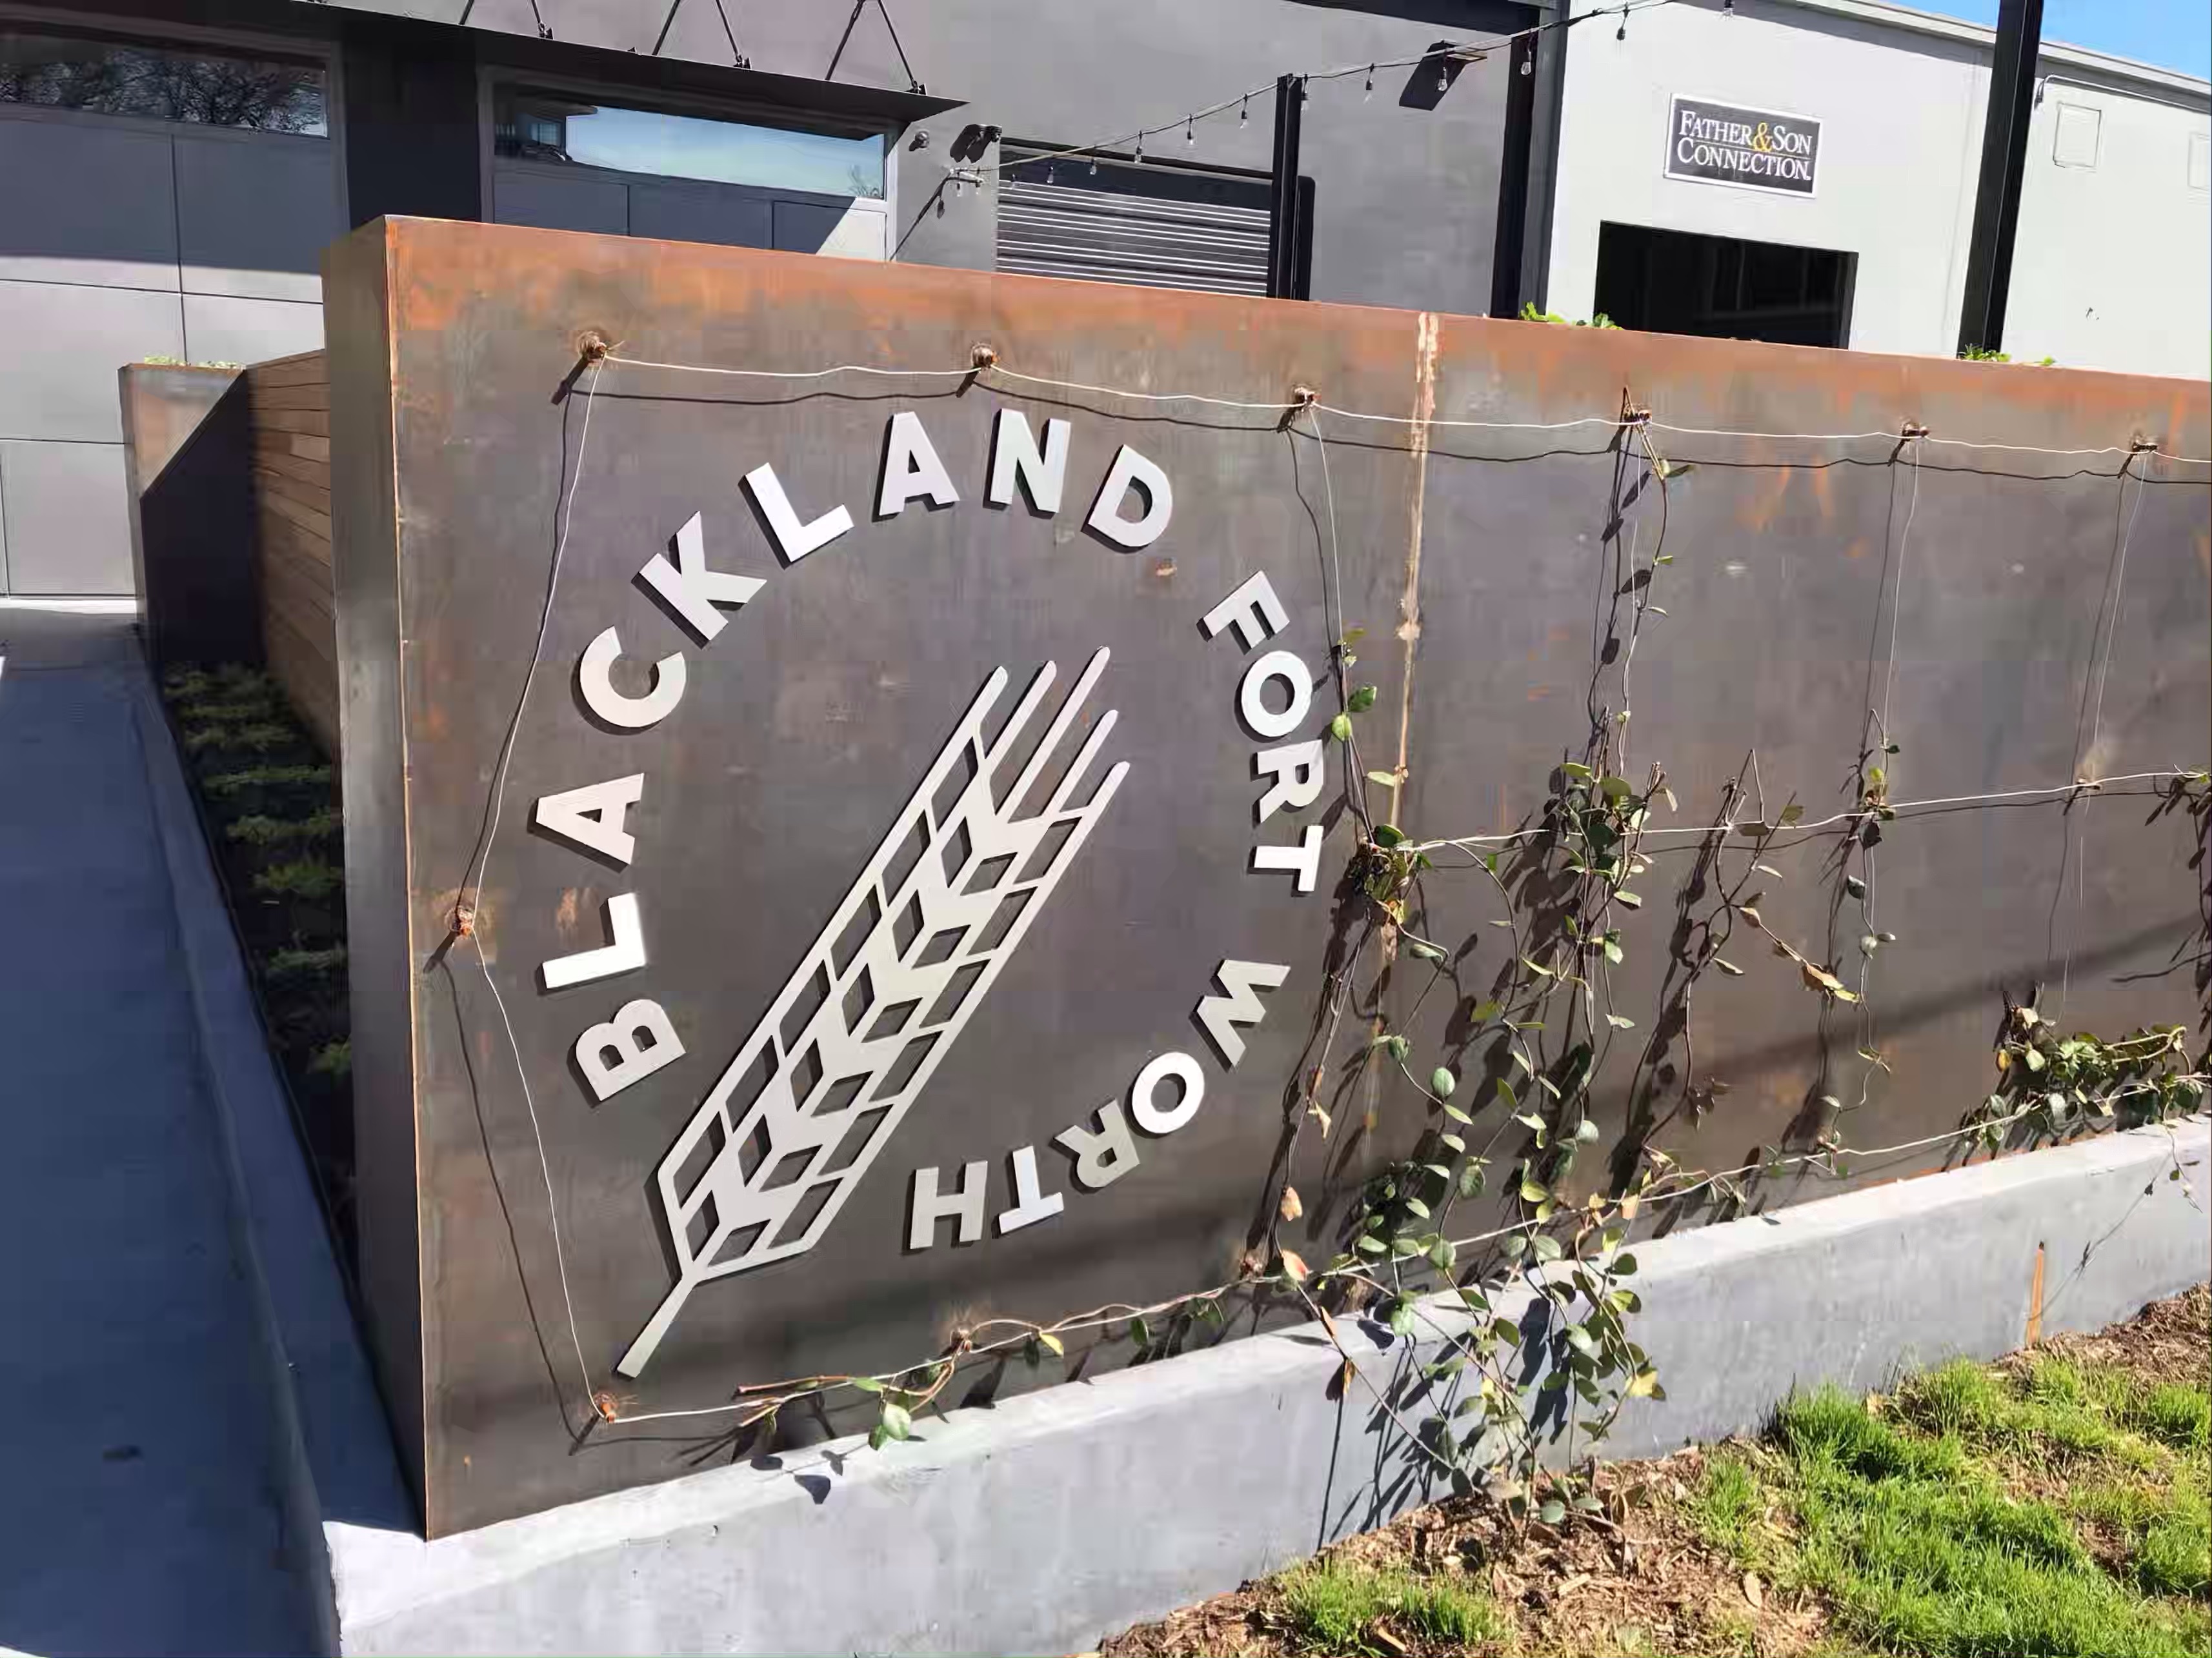 The Most Unique Spirits and Cocktails in Fort Worth are at Blackland Distillery